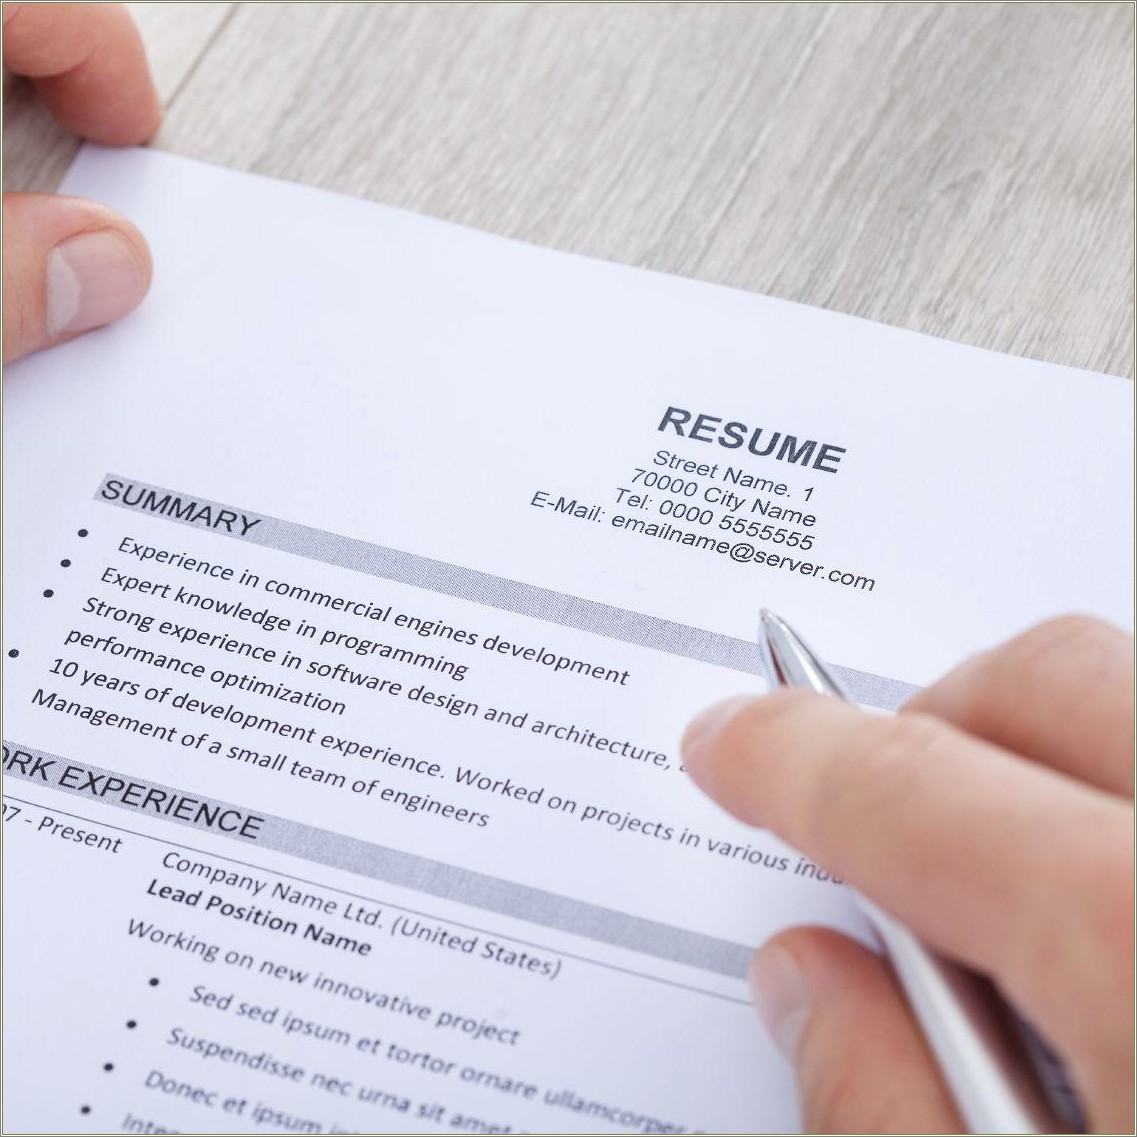 Are Summary Lines Necessary In Resumes